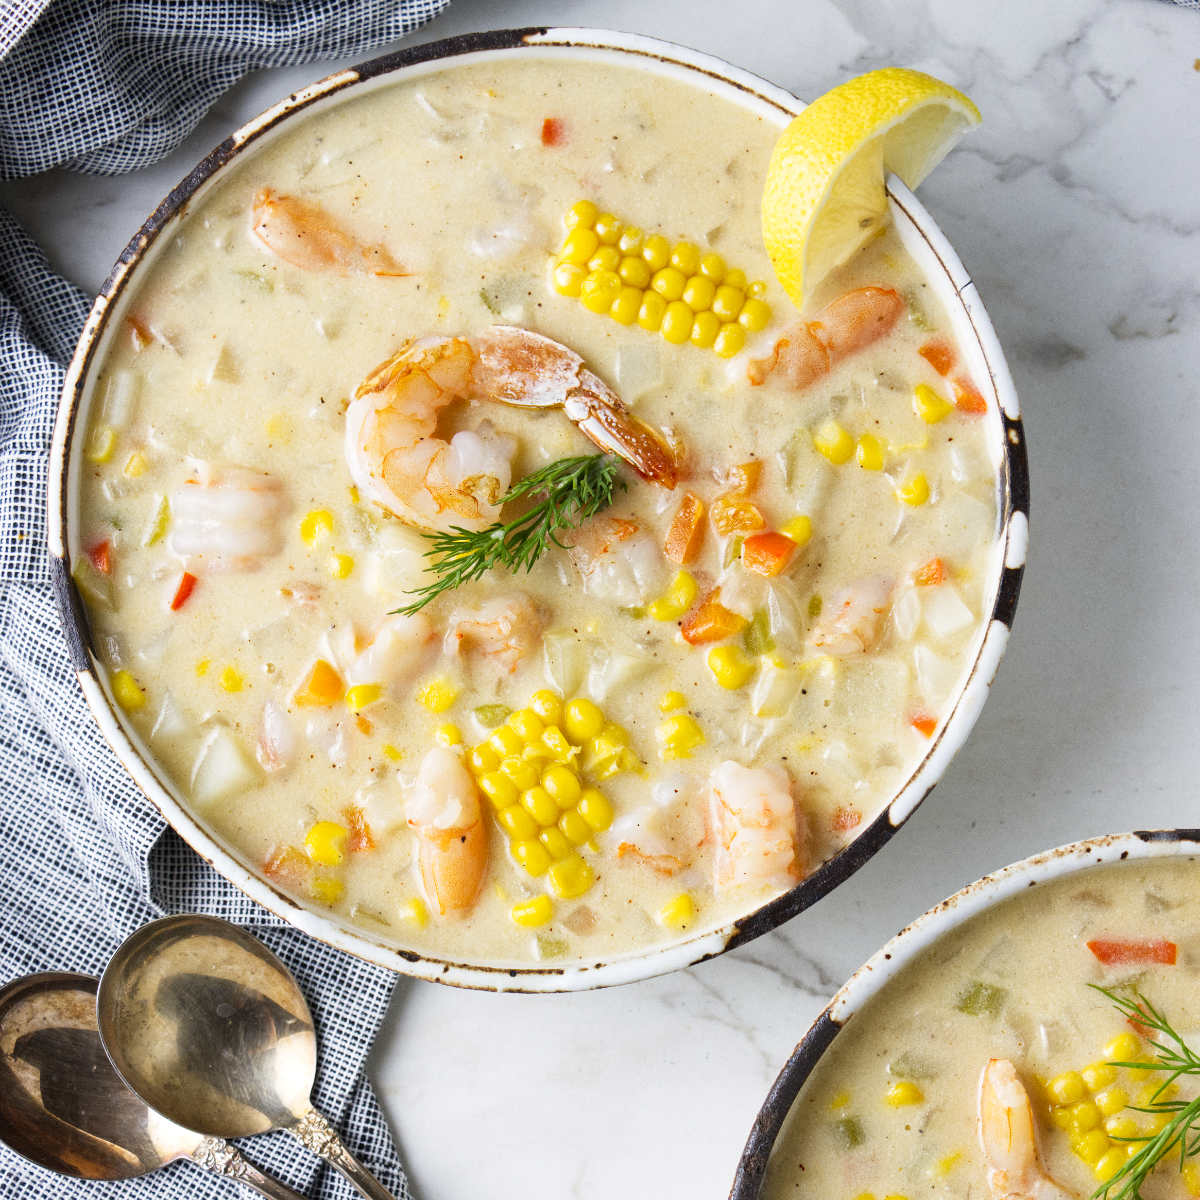 Shrimp and corn bisque in a bowl.